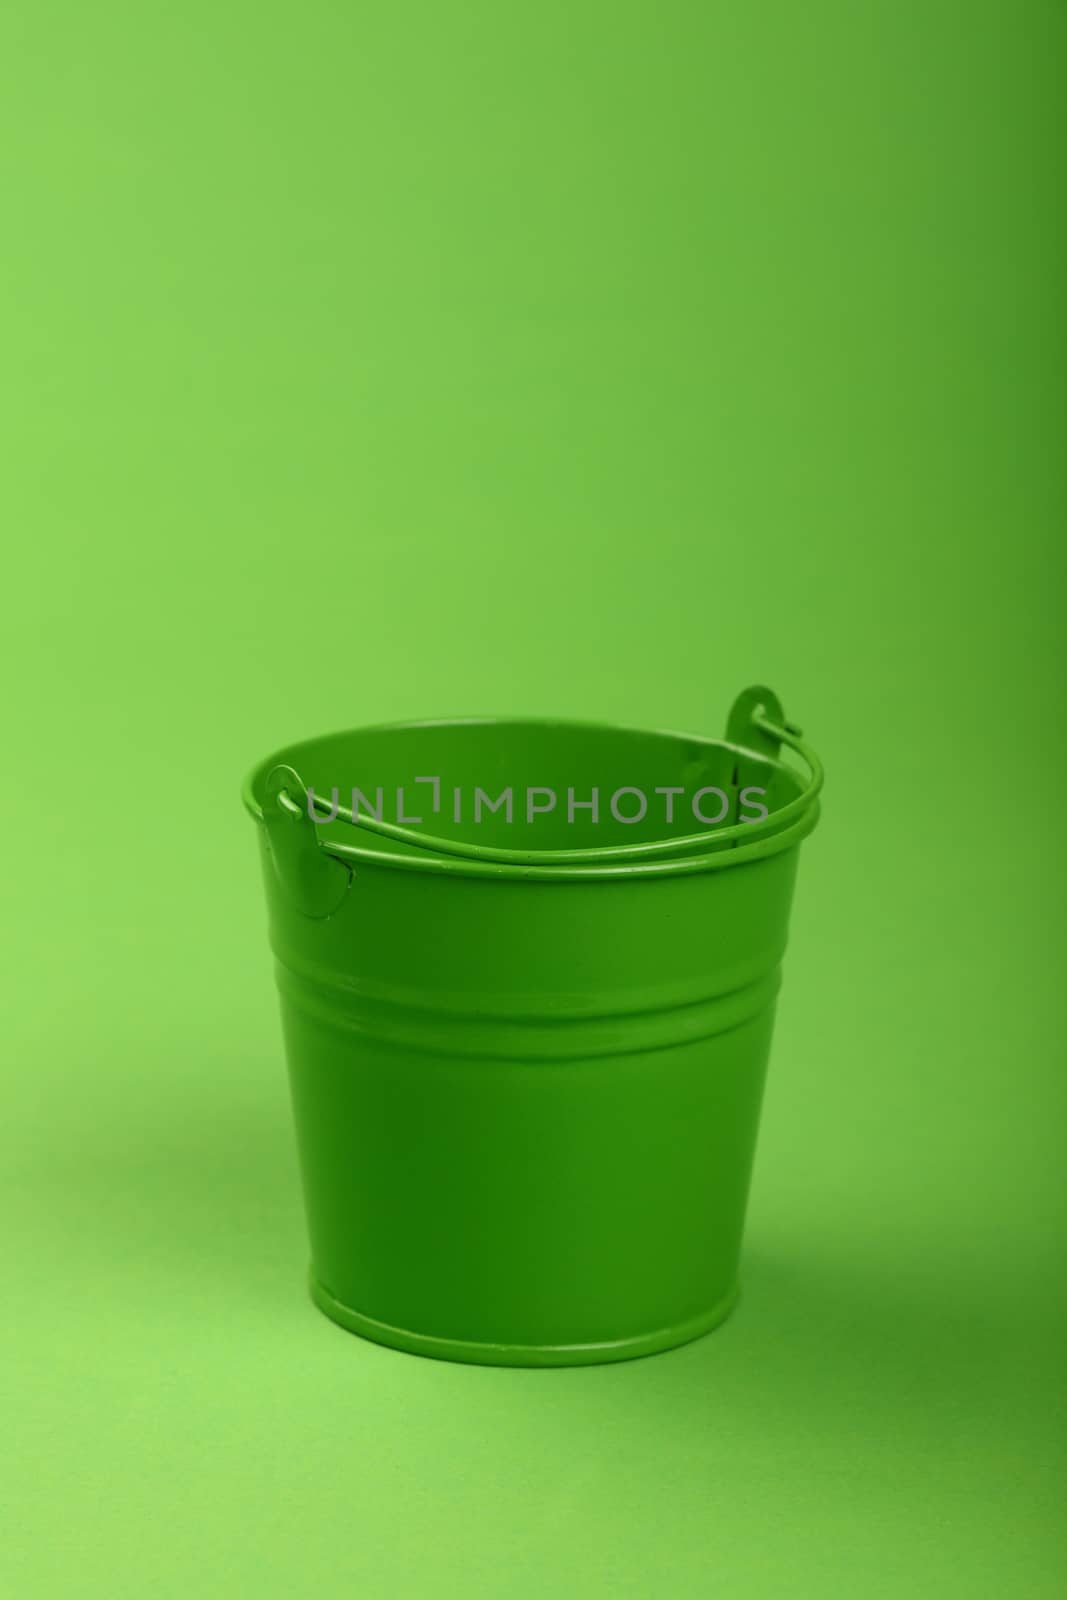 One small green painted metal empty toy bucket over green paper background, close up, high angle view